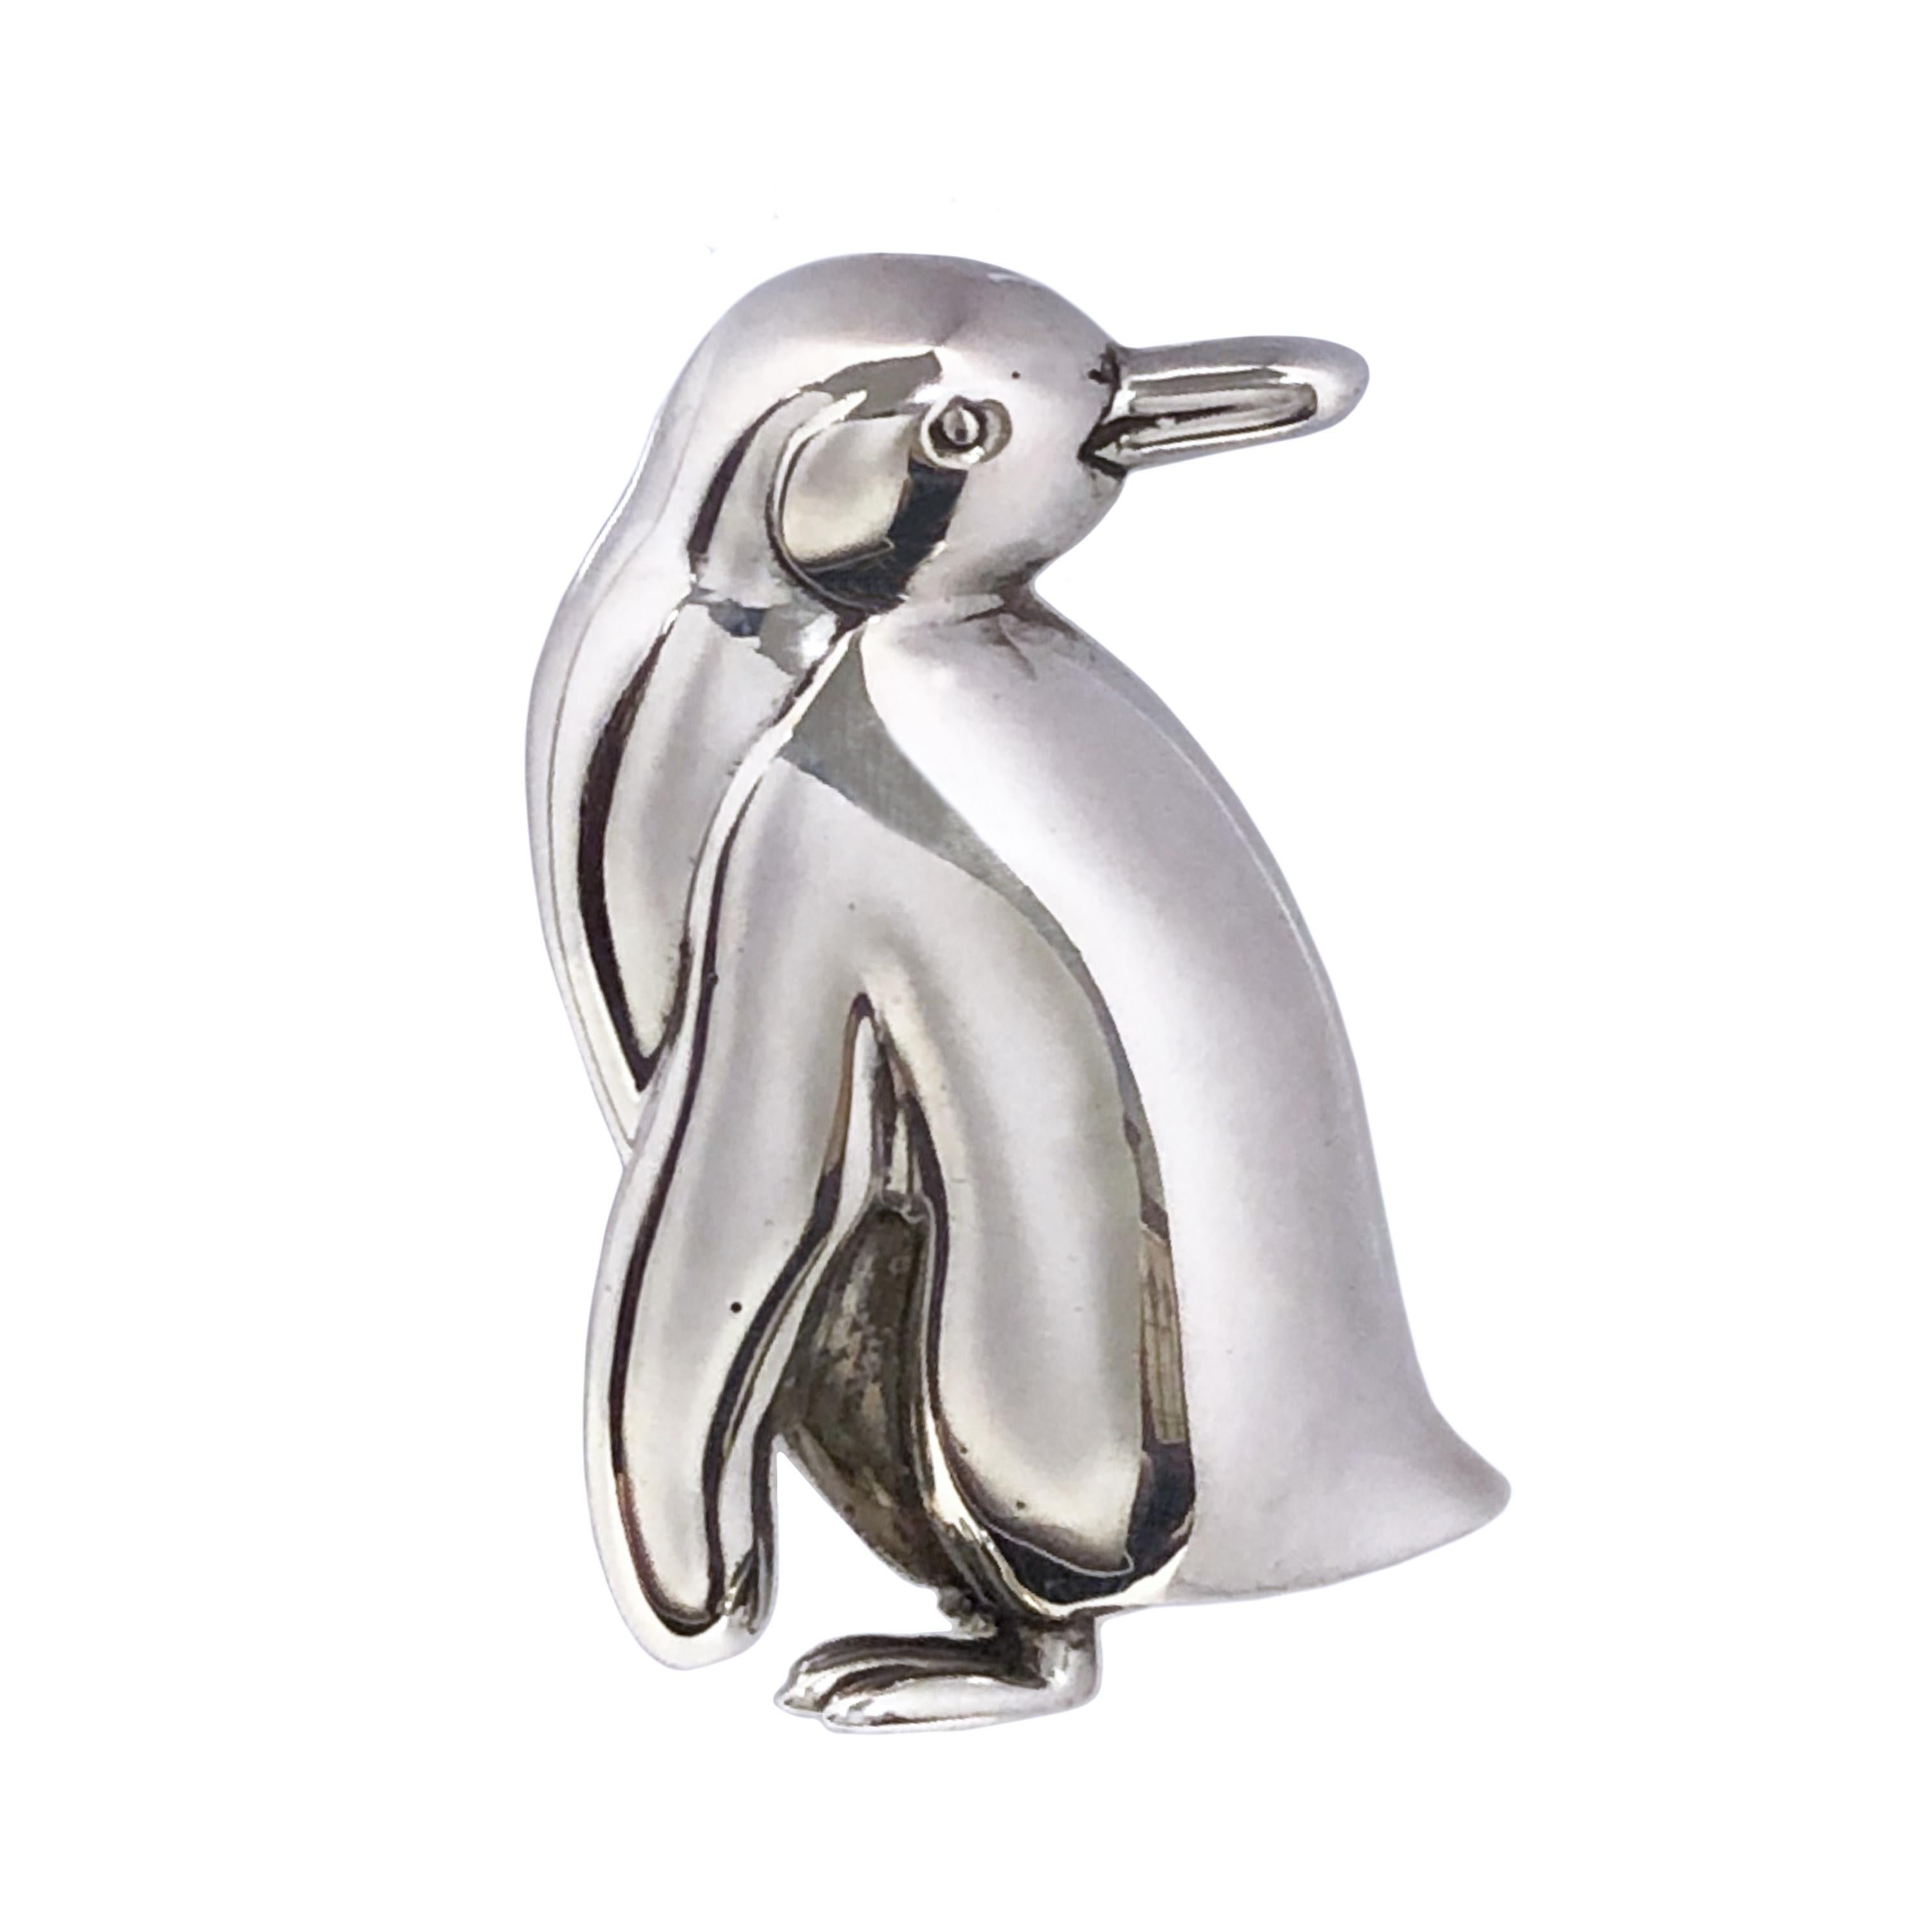 Circa 1990 Tiffany & Company Sterling Silver Whimsical Penguin Brooch. Measuring 1 1/2 inches in length and 1 inch wide, nice solid construction and detail. 